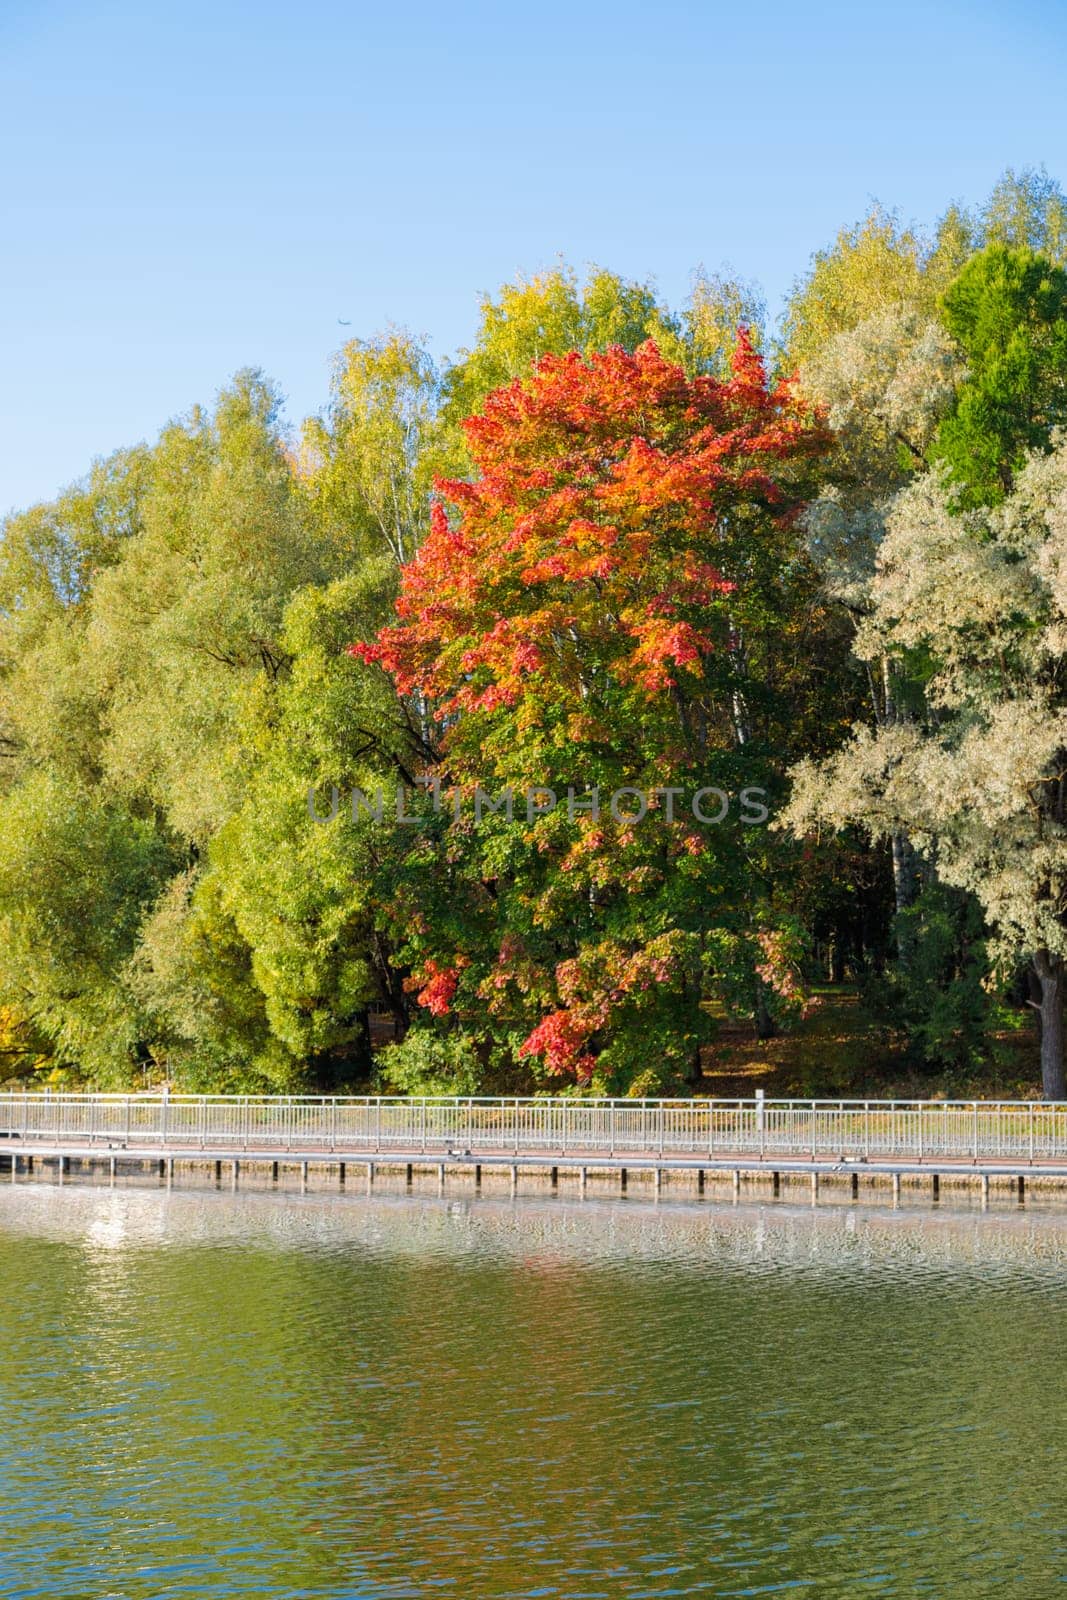 Autumn City Park: The view of the pond inspires the tranquility and beauty of nature by Yurich32